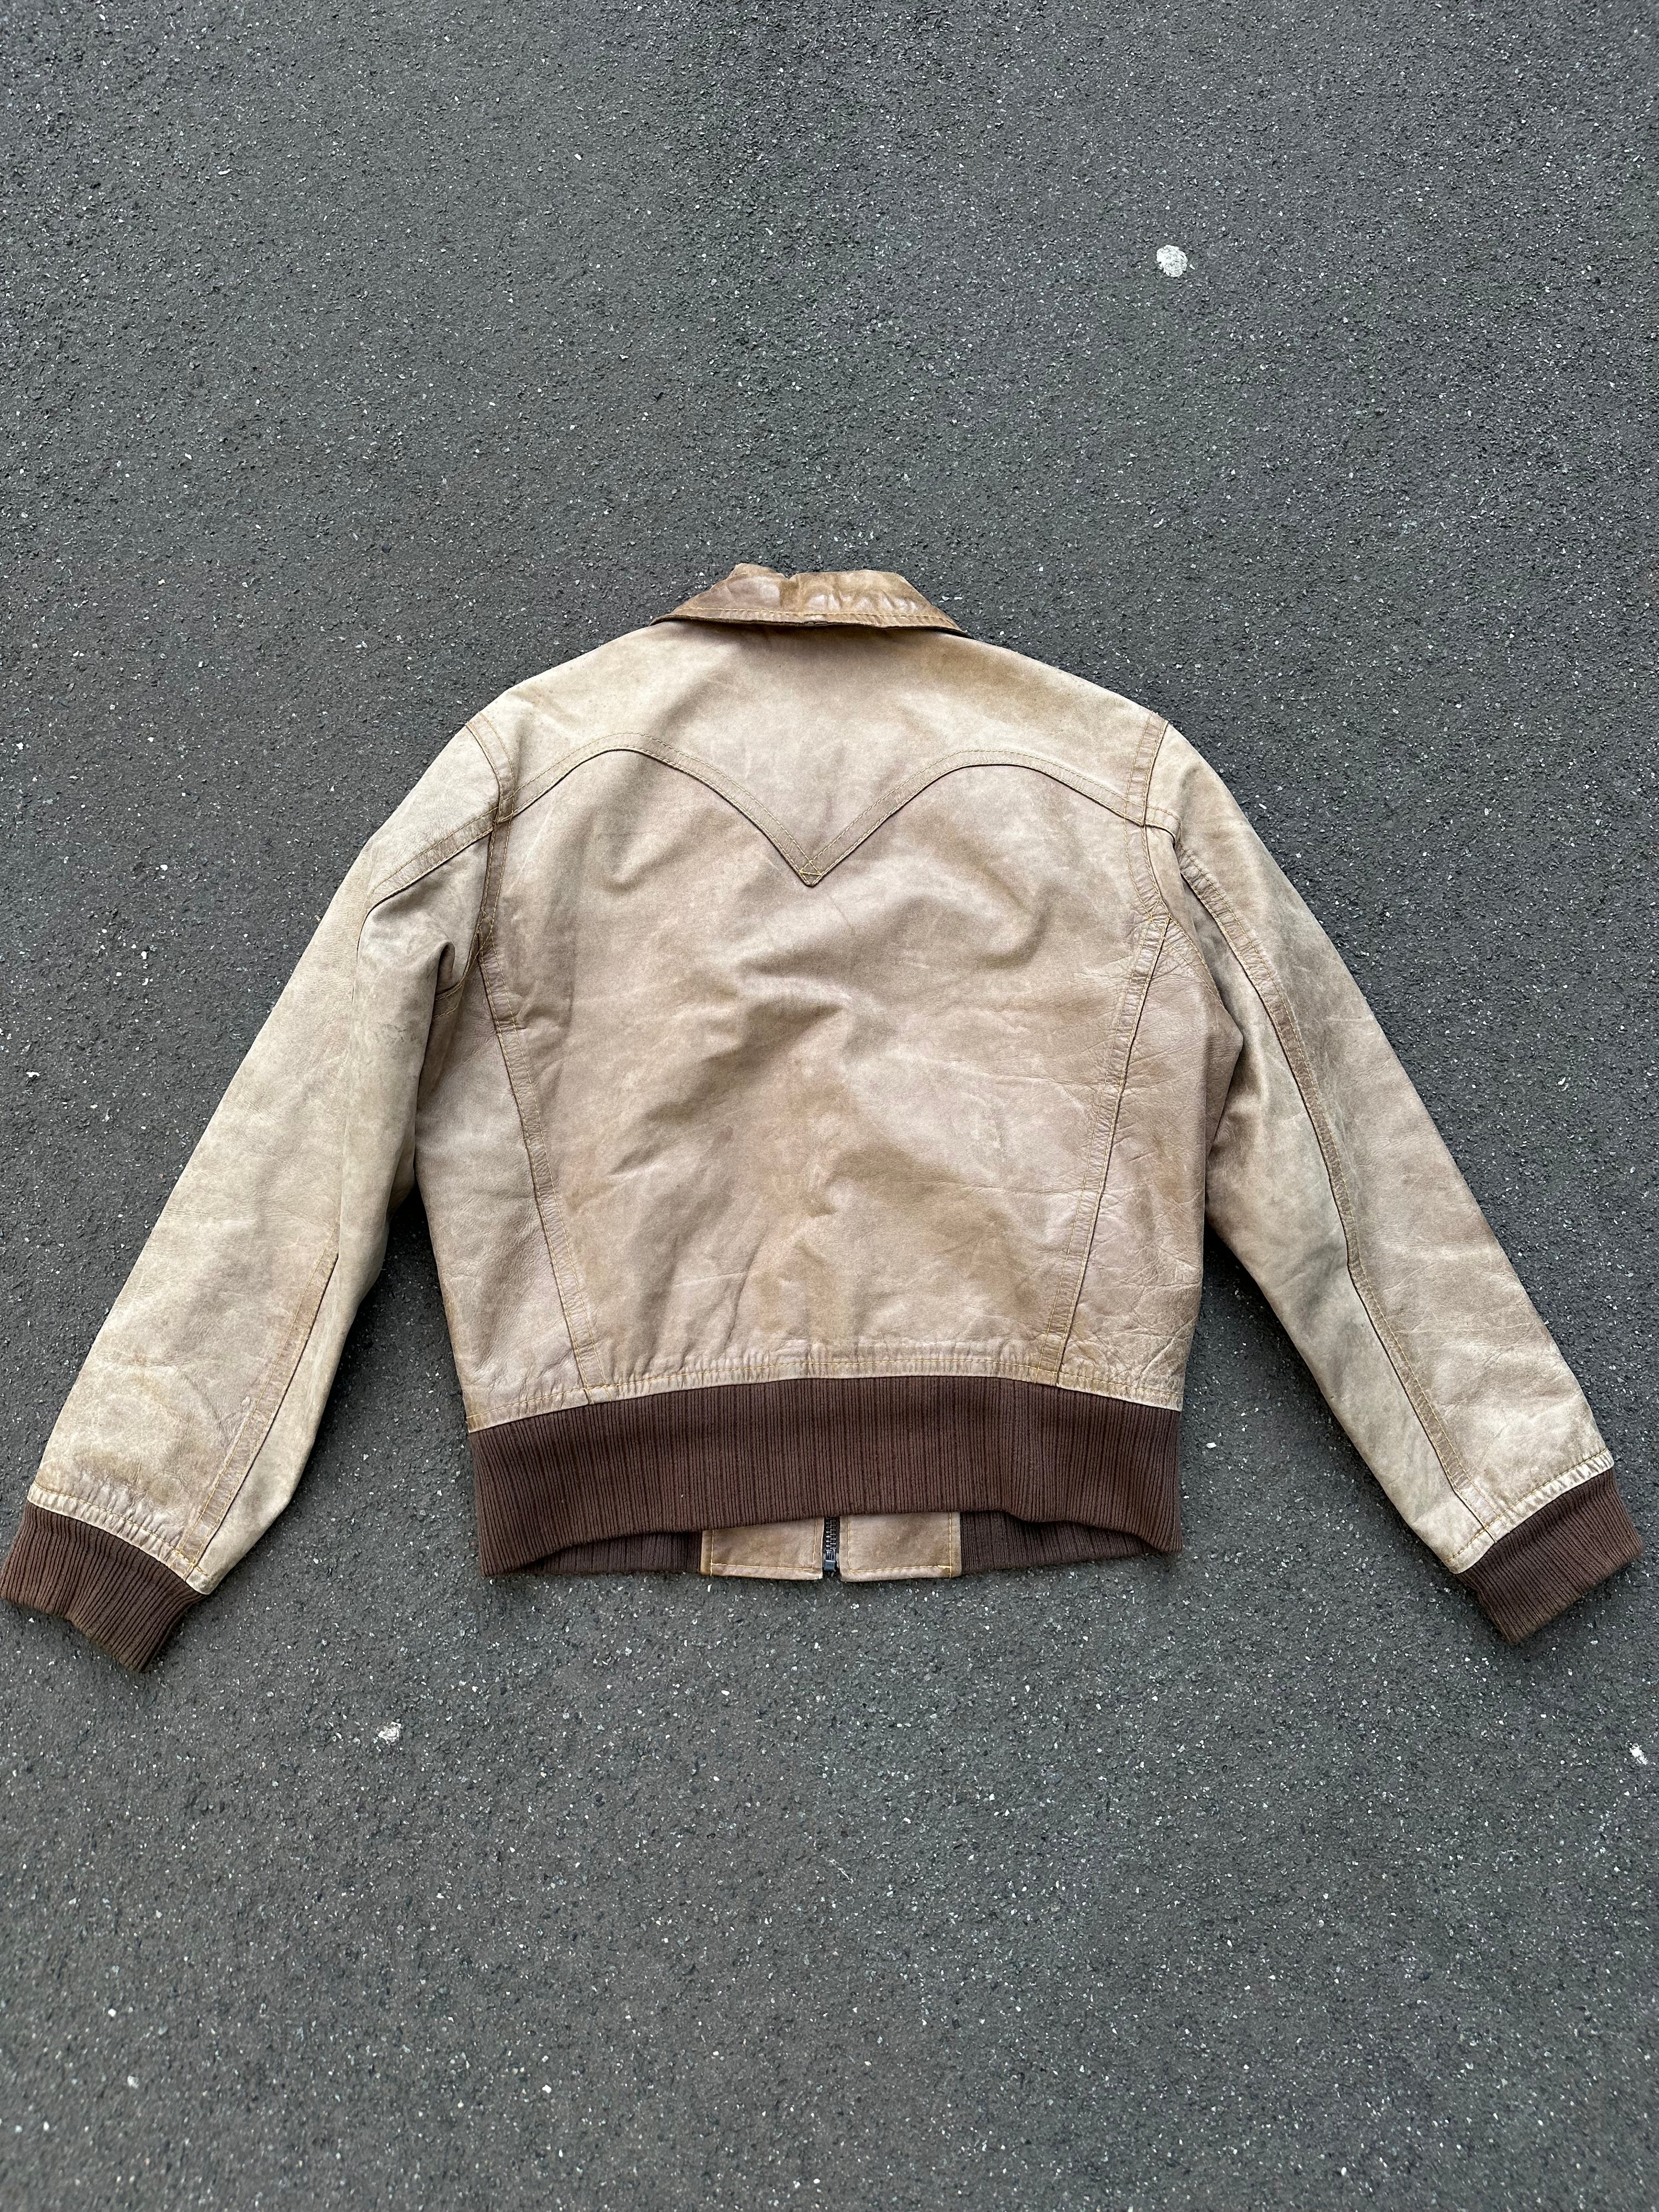 Early 2000s Levi’s Type 1 Leatherjacket (M/L)